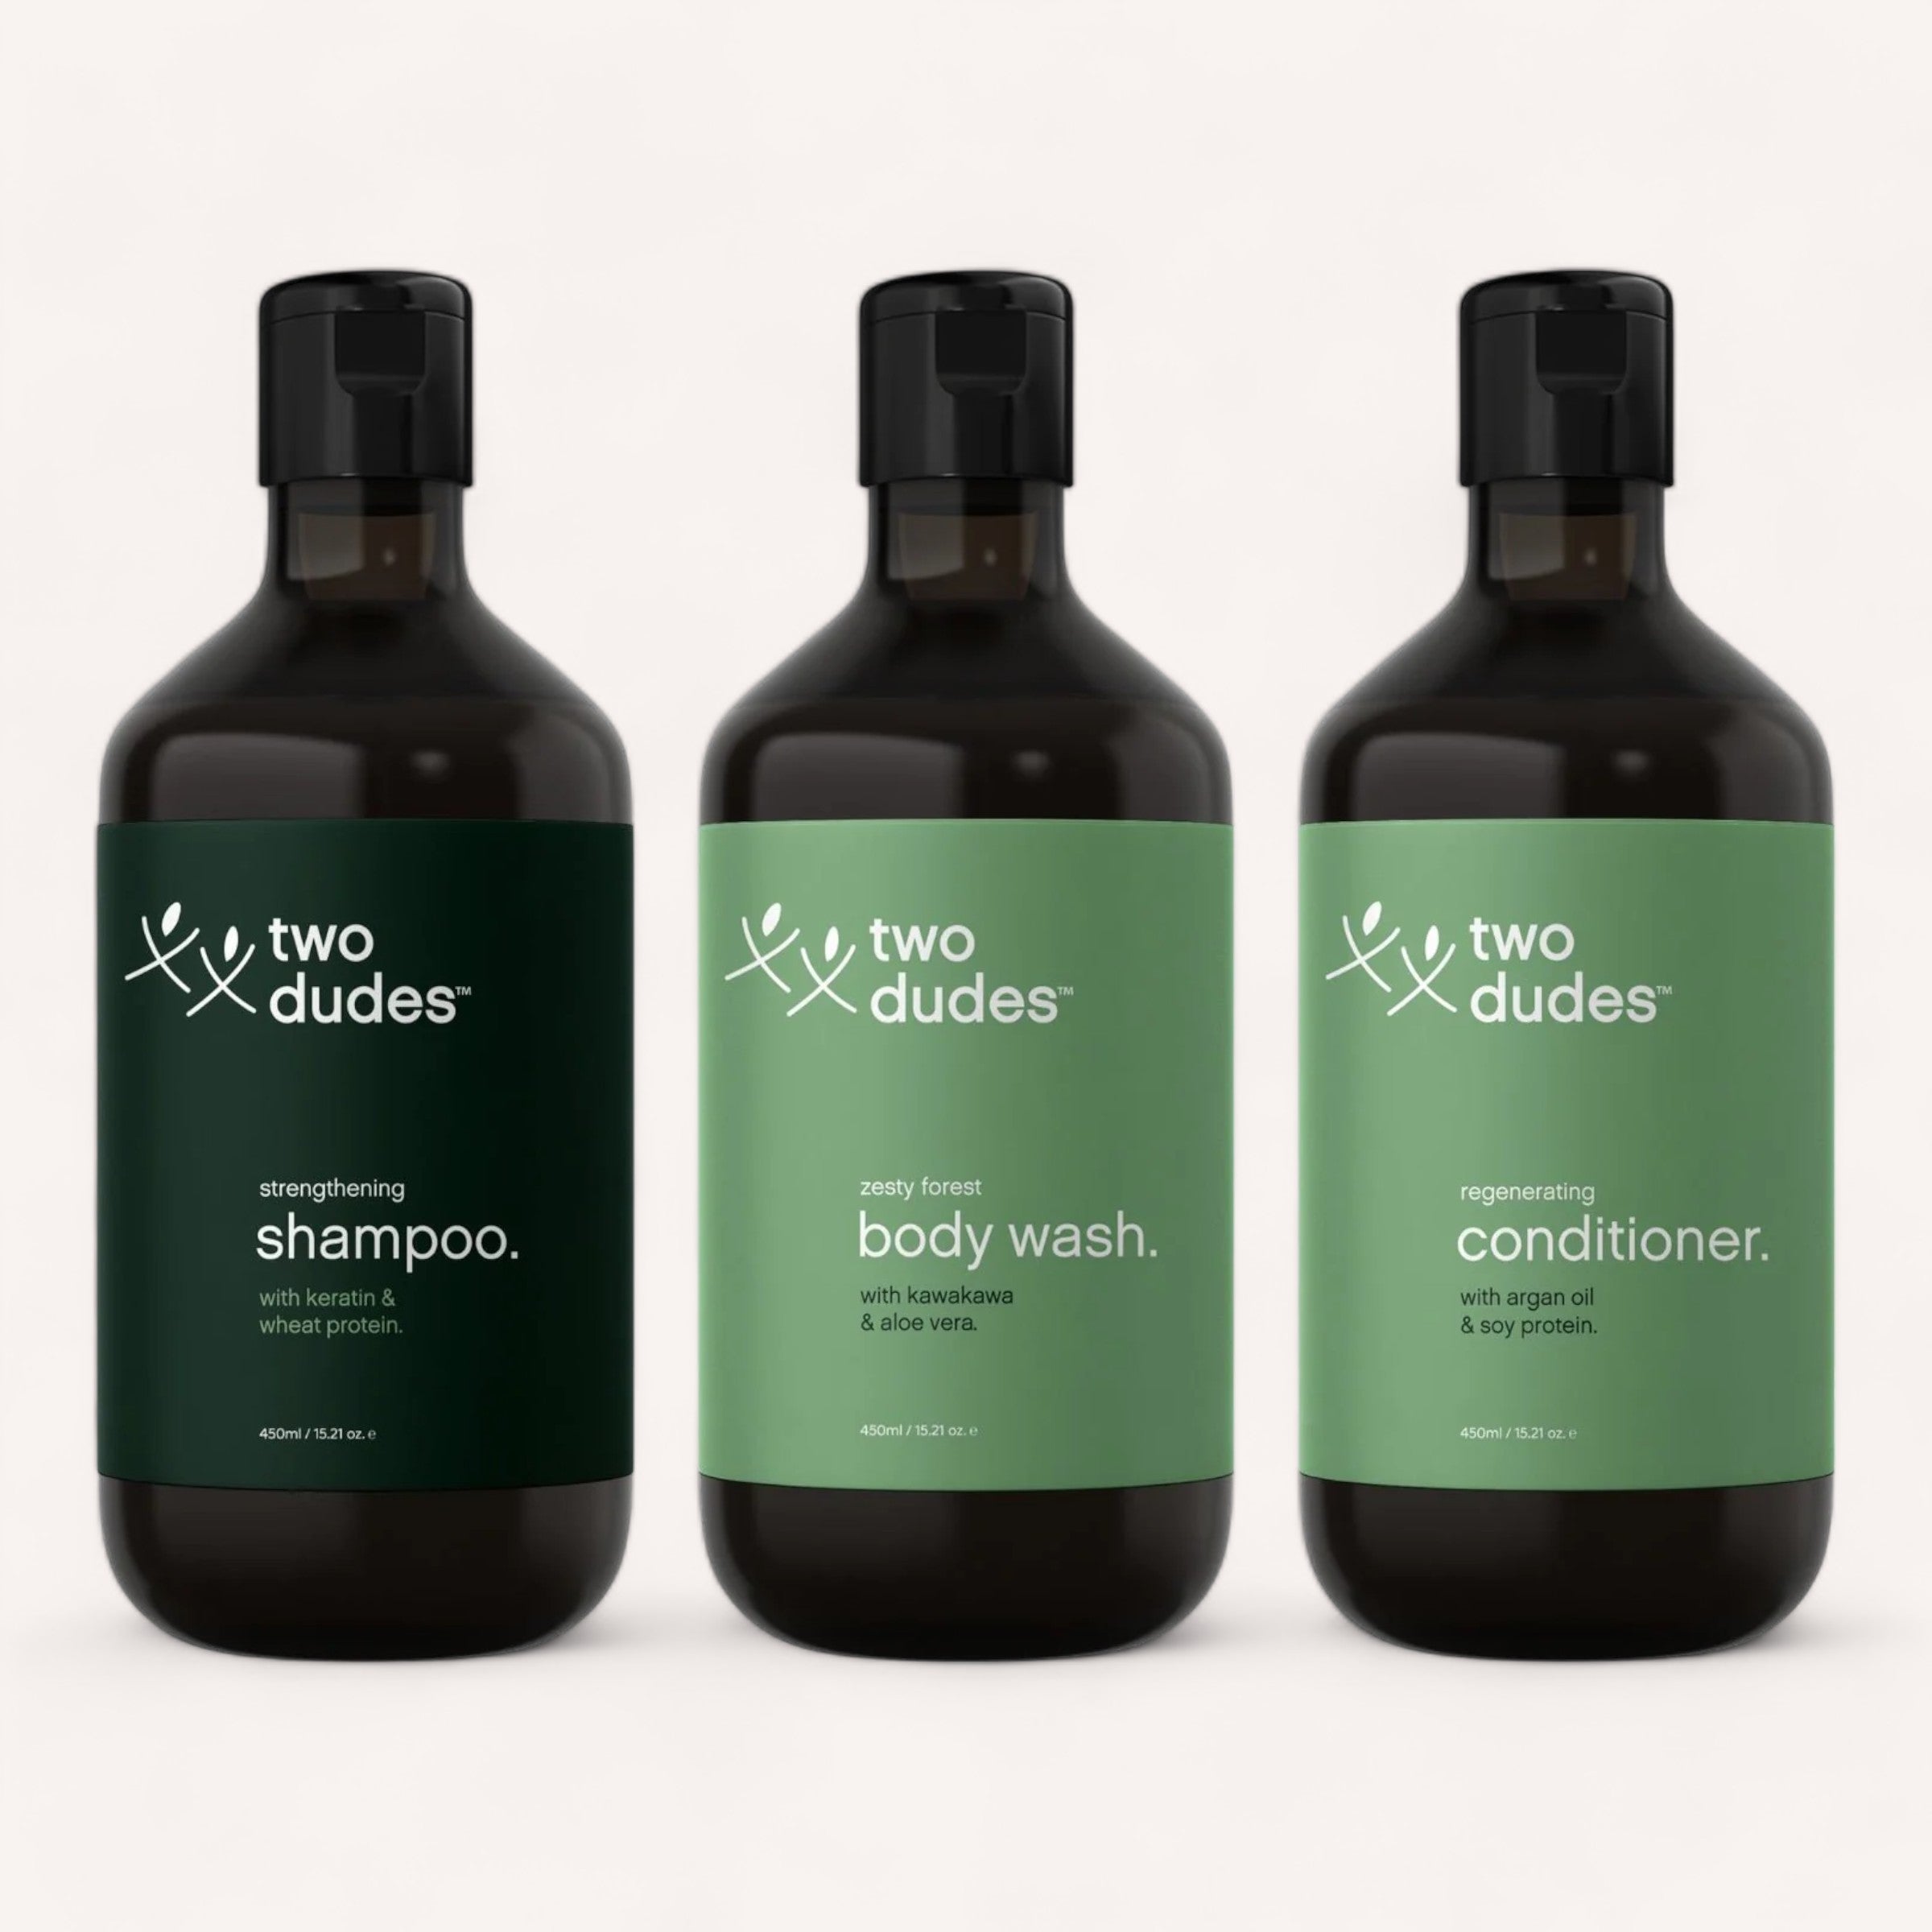 Three bottles of Two Dudes Bundle, including strengthening shampoo, zesty forest body wash, and regenerating conditioner, lined up against a white background.